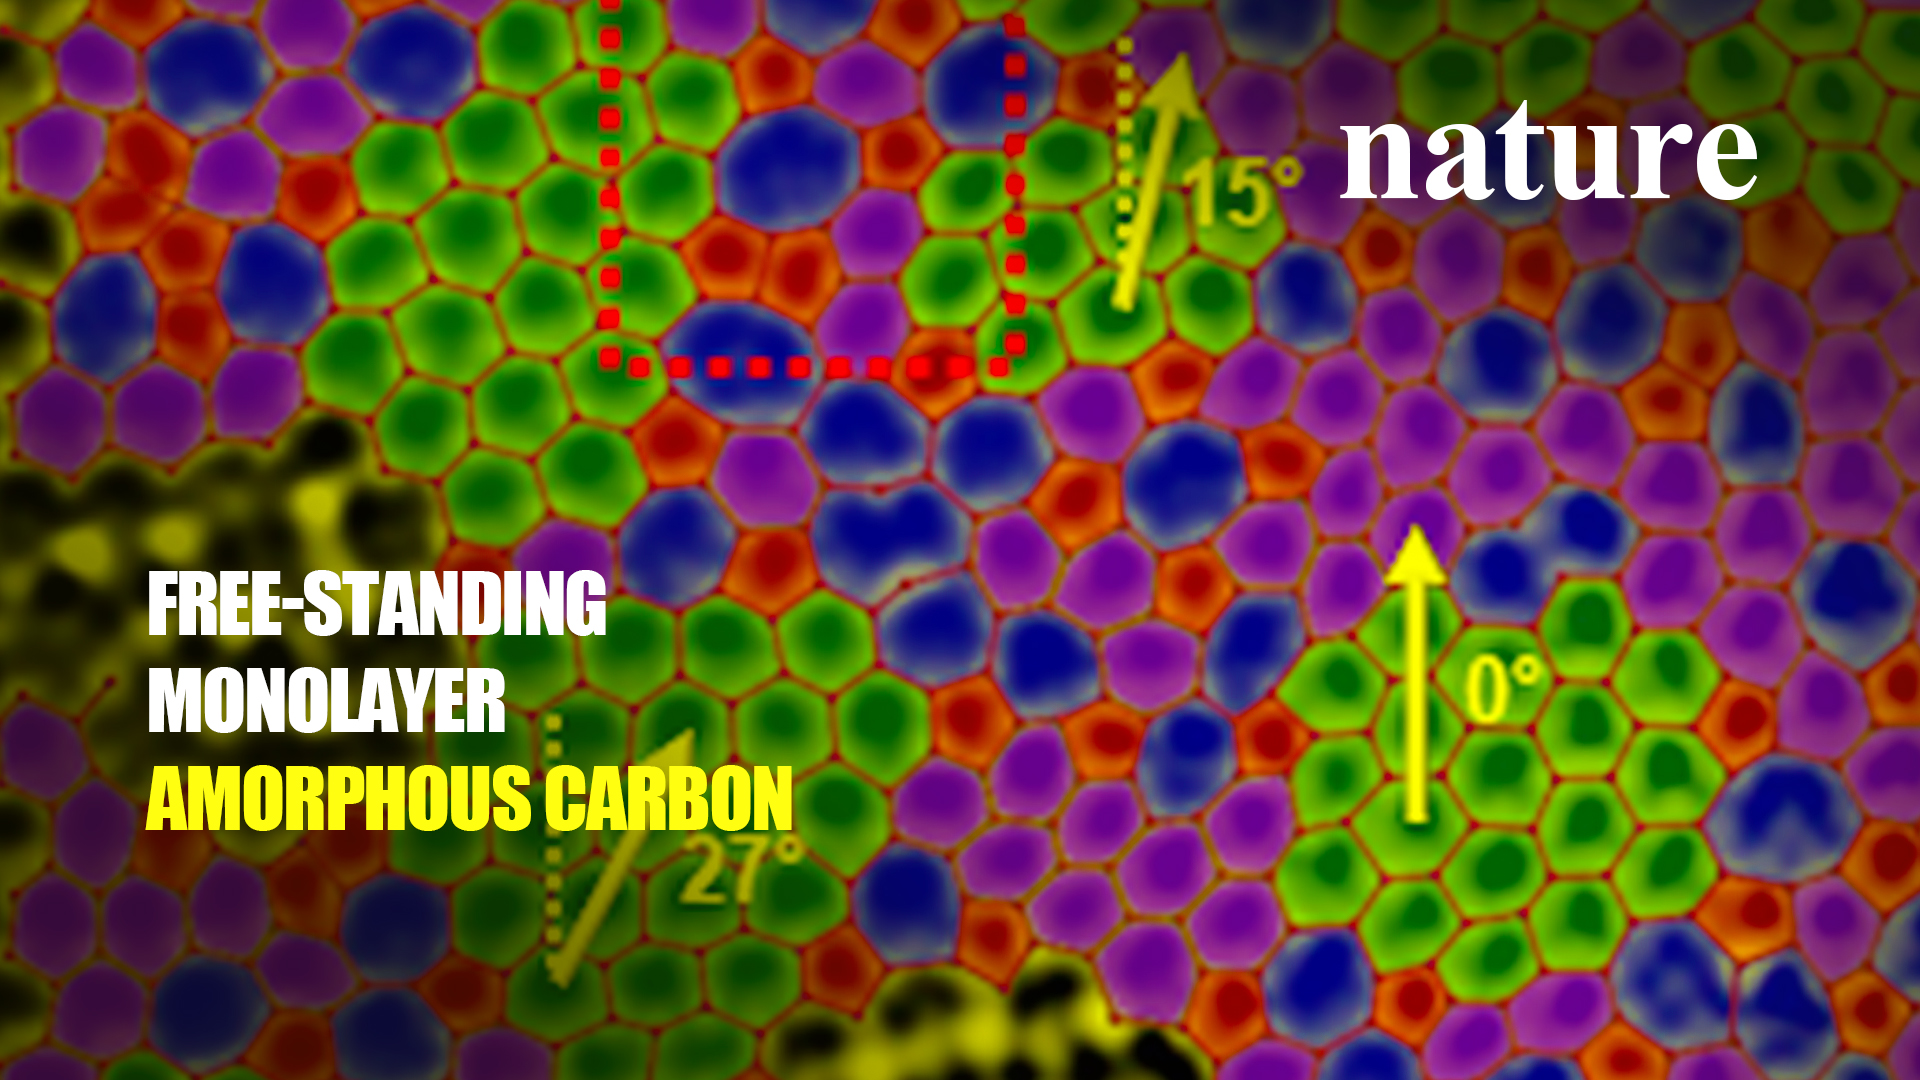 New technology could come soon from single-layer amorphous carbon following new research